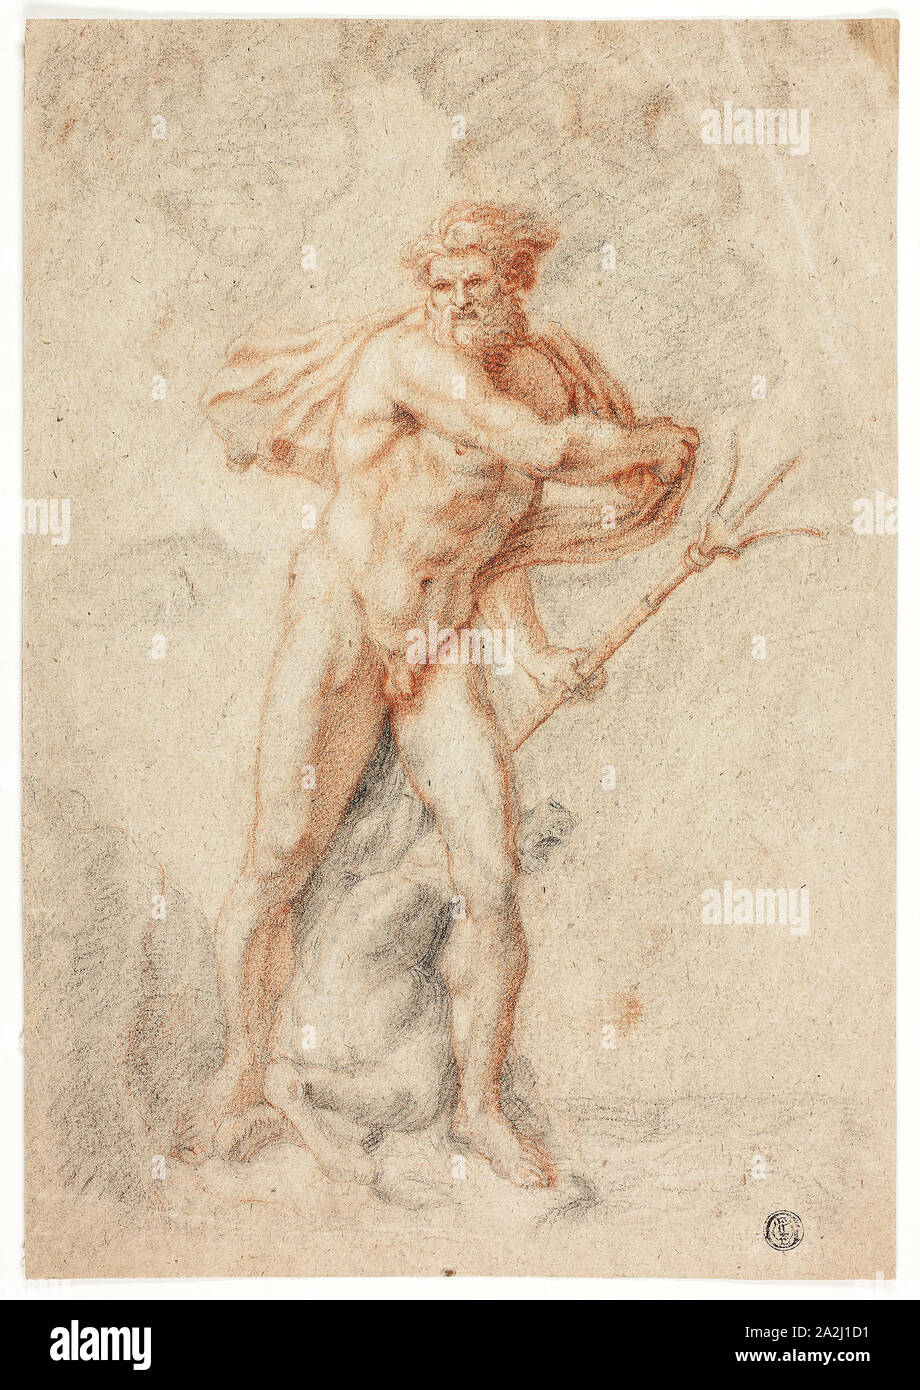 Neptune, n.d., Possibly Theodor van Thulden, Dutch, 1606-1669, Netherlands, Black and red chalk, heightened with white chalk, on tan laid paper, 320 x 221 mm Stock Photo